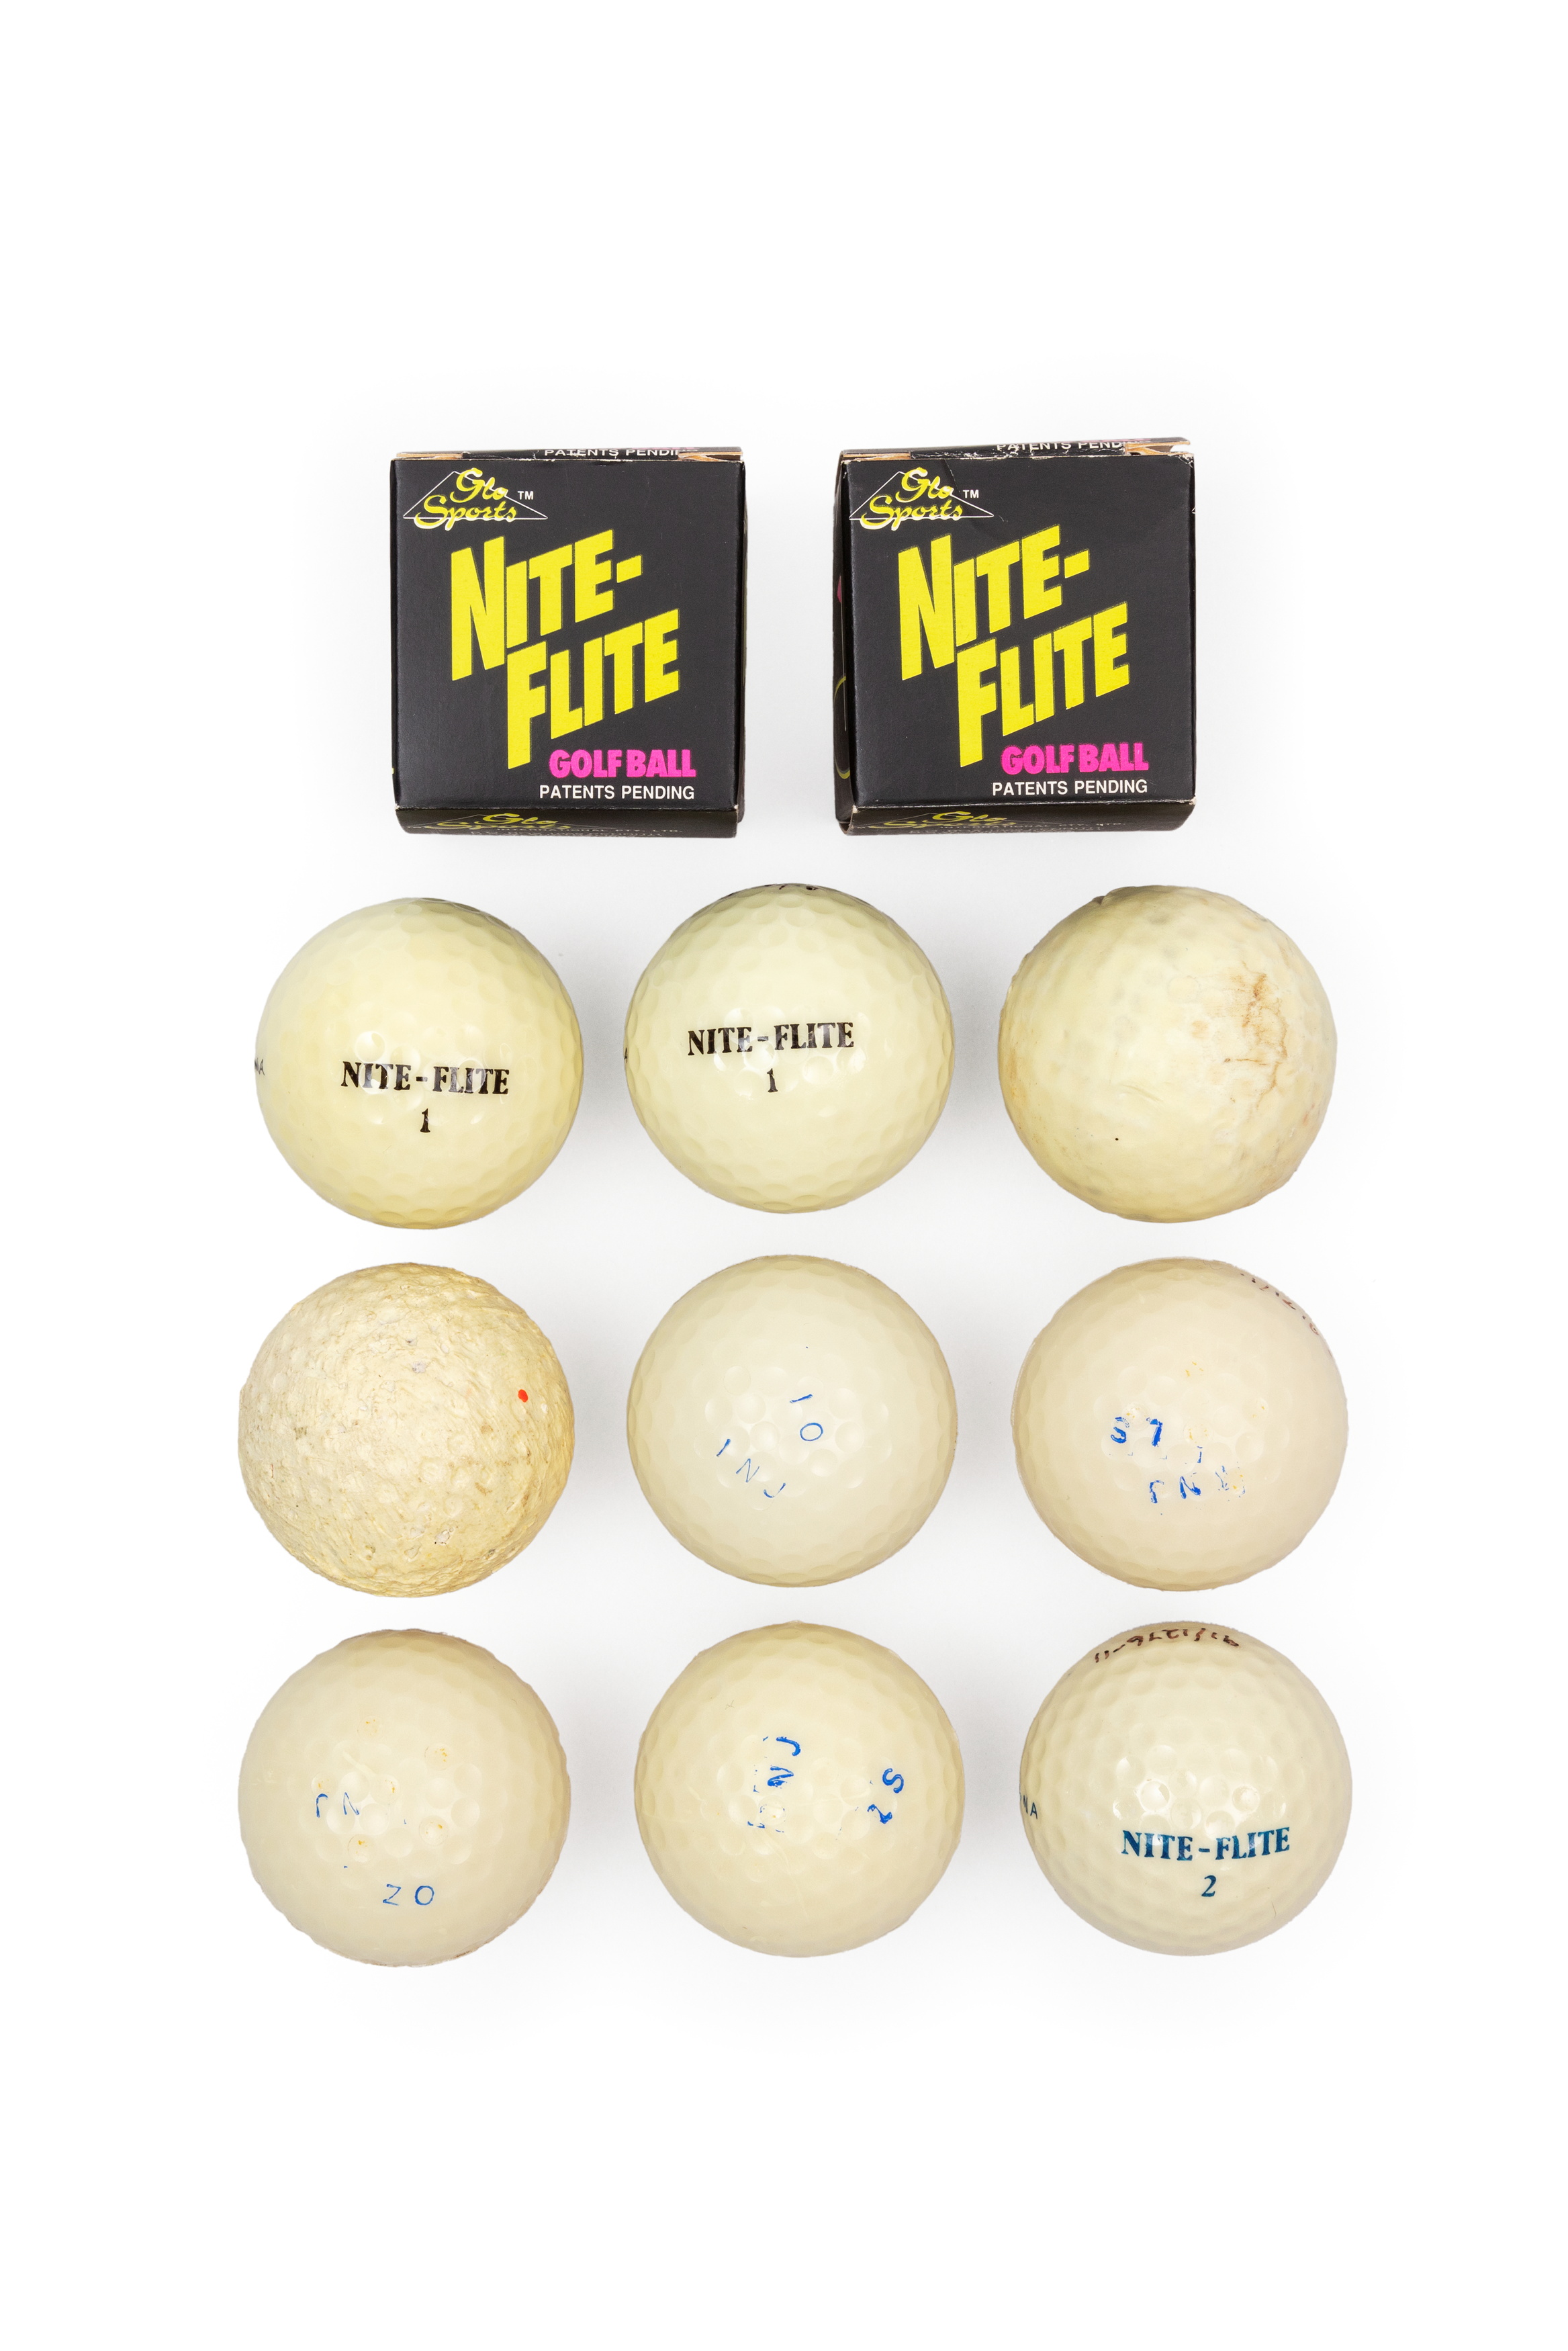 Powerhouse Collection - Golf balls designed by Glo Sports